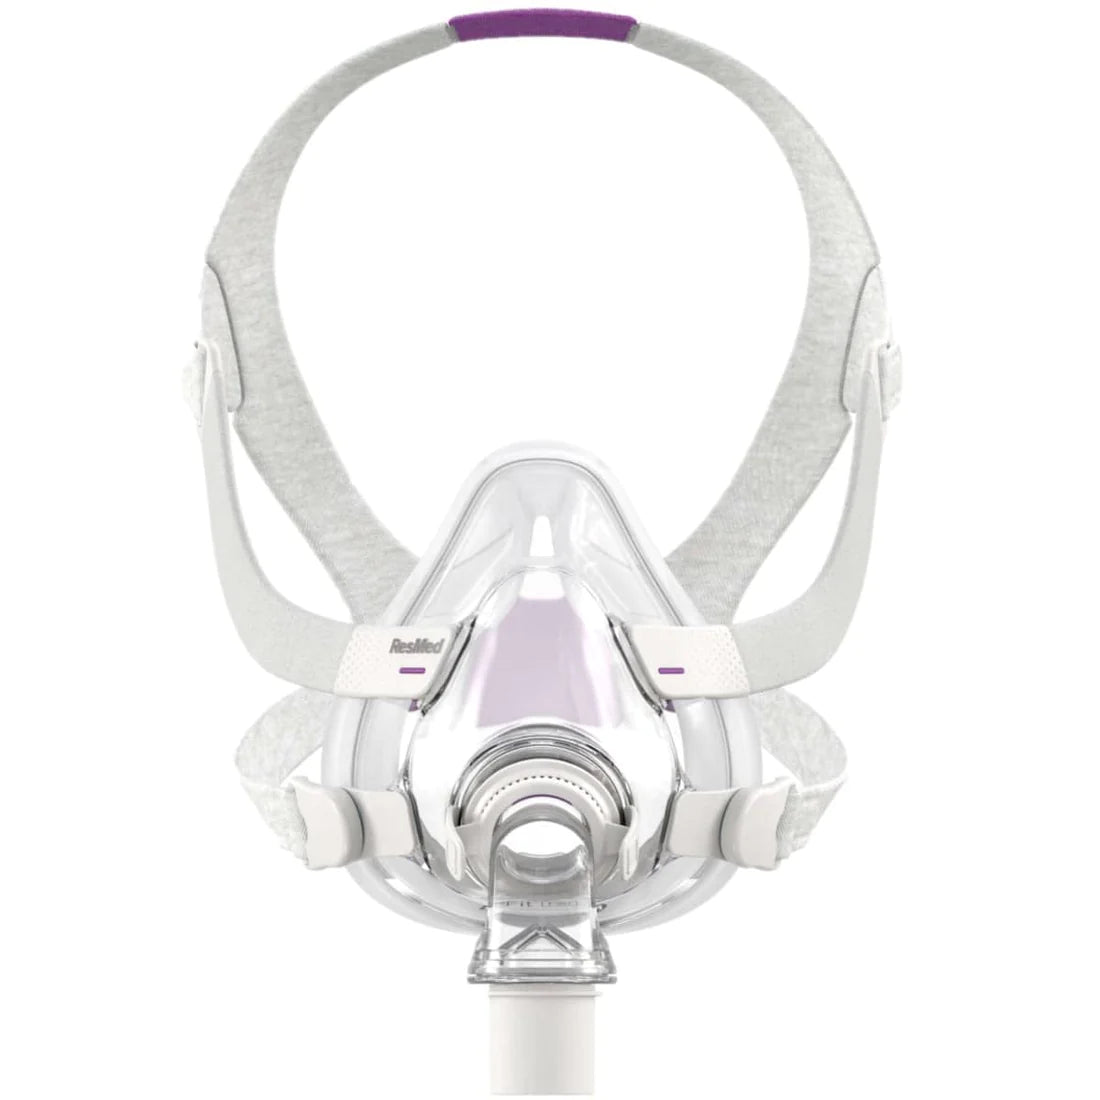 ResMed AirFit™ F20 Full-Face Mask Complete System for Her - Size Small